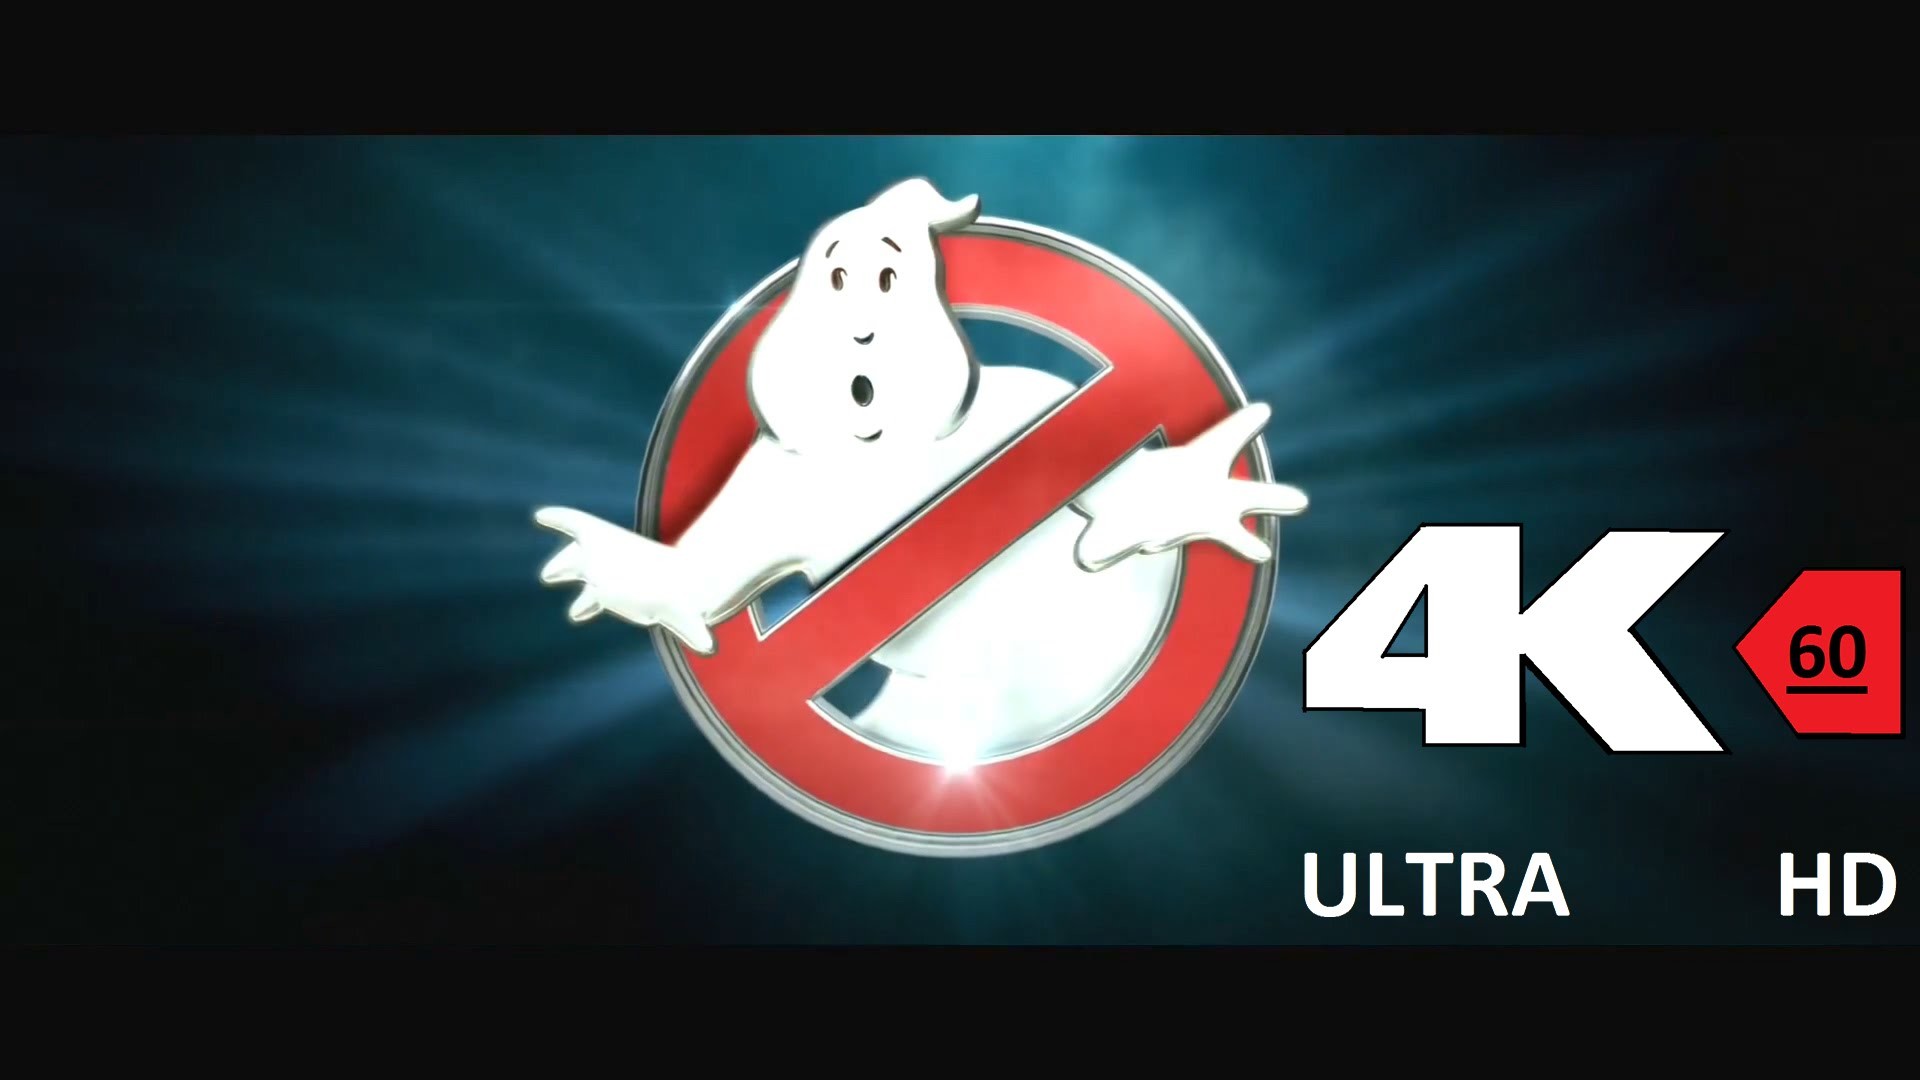 1920x1080 [4k][60FPS] GHOSTBUSTERS Official Trailer Announcement 4K 60FPS HFR[UHD]  ULTRA HD - YouTube